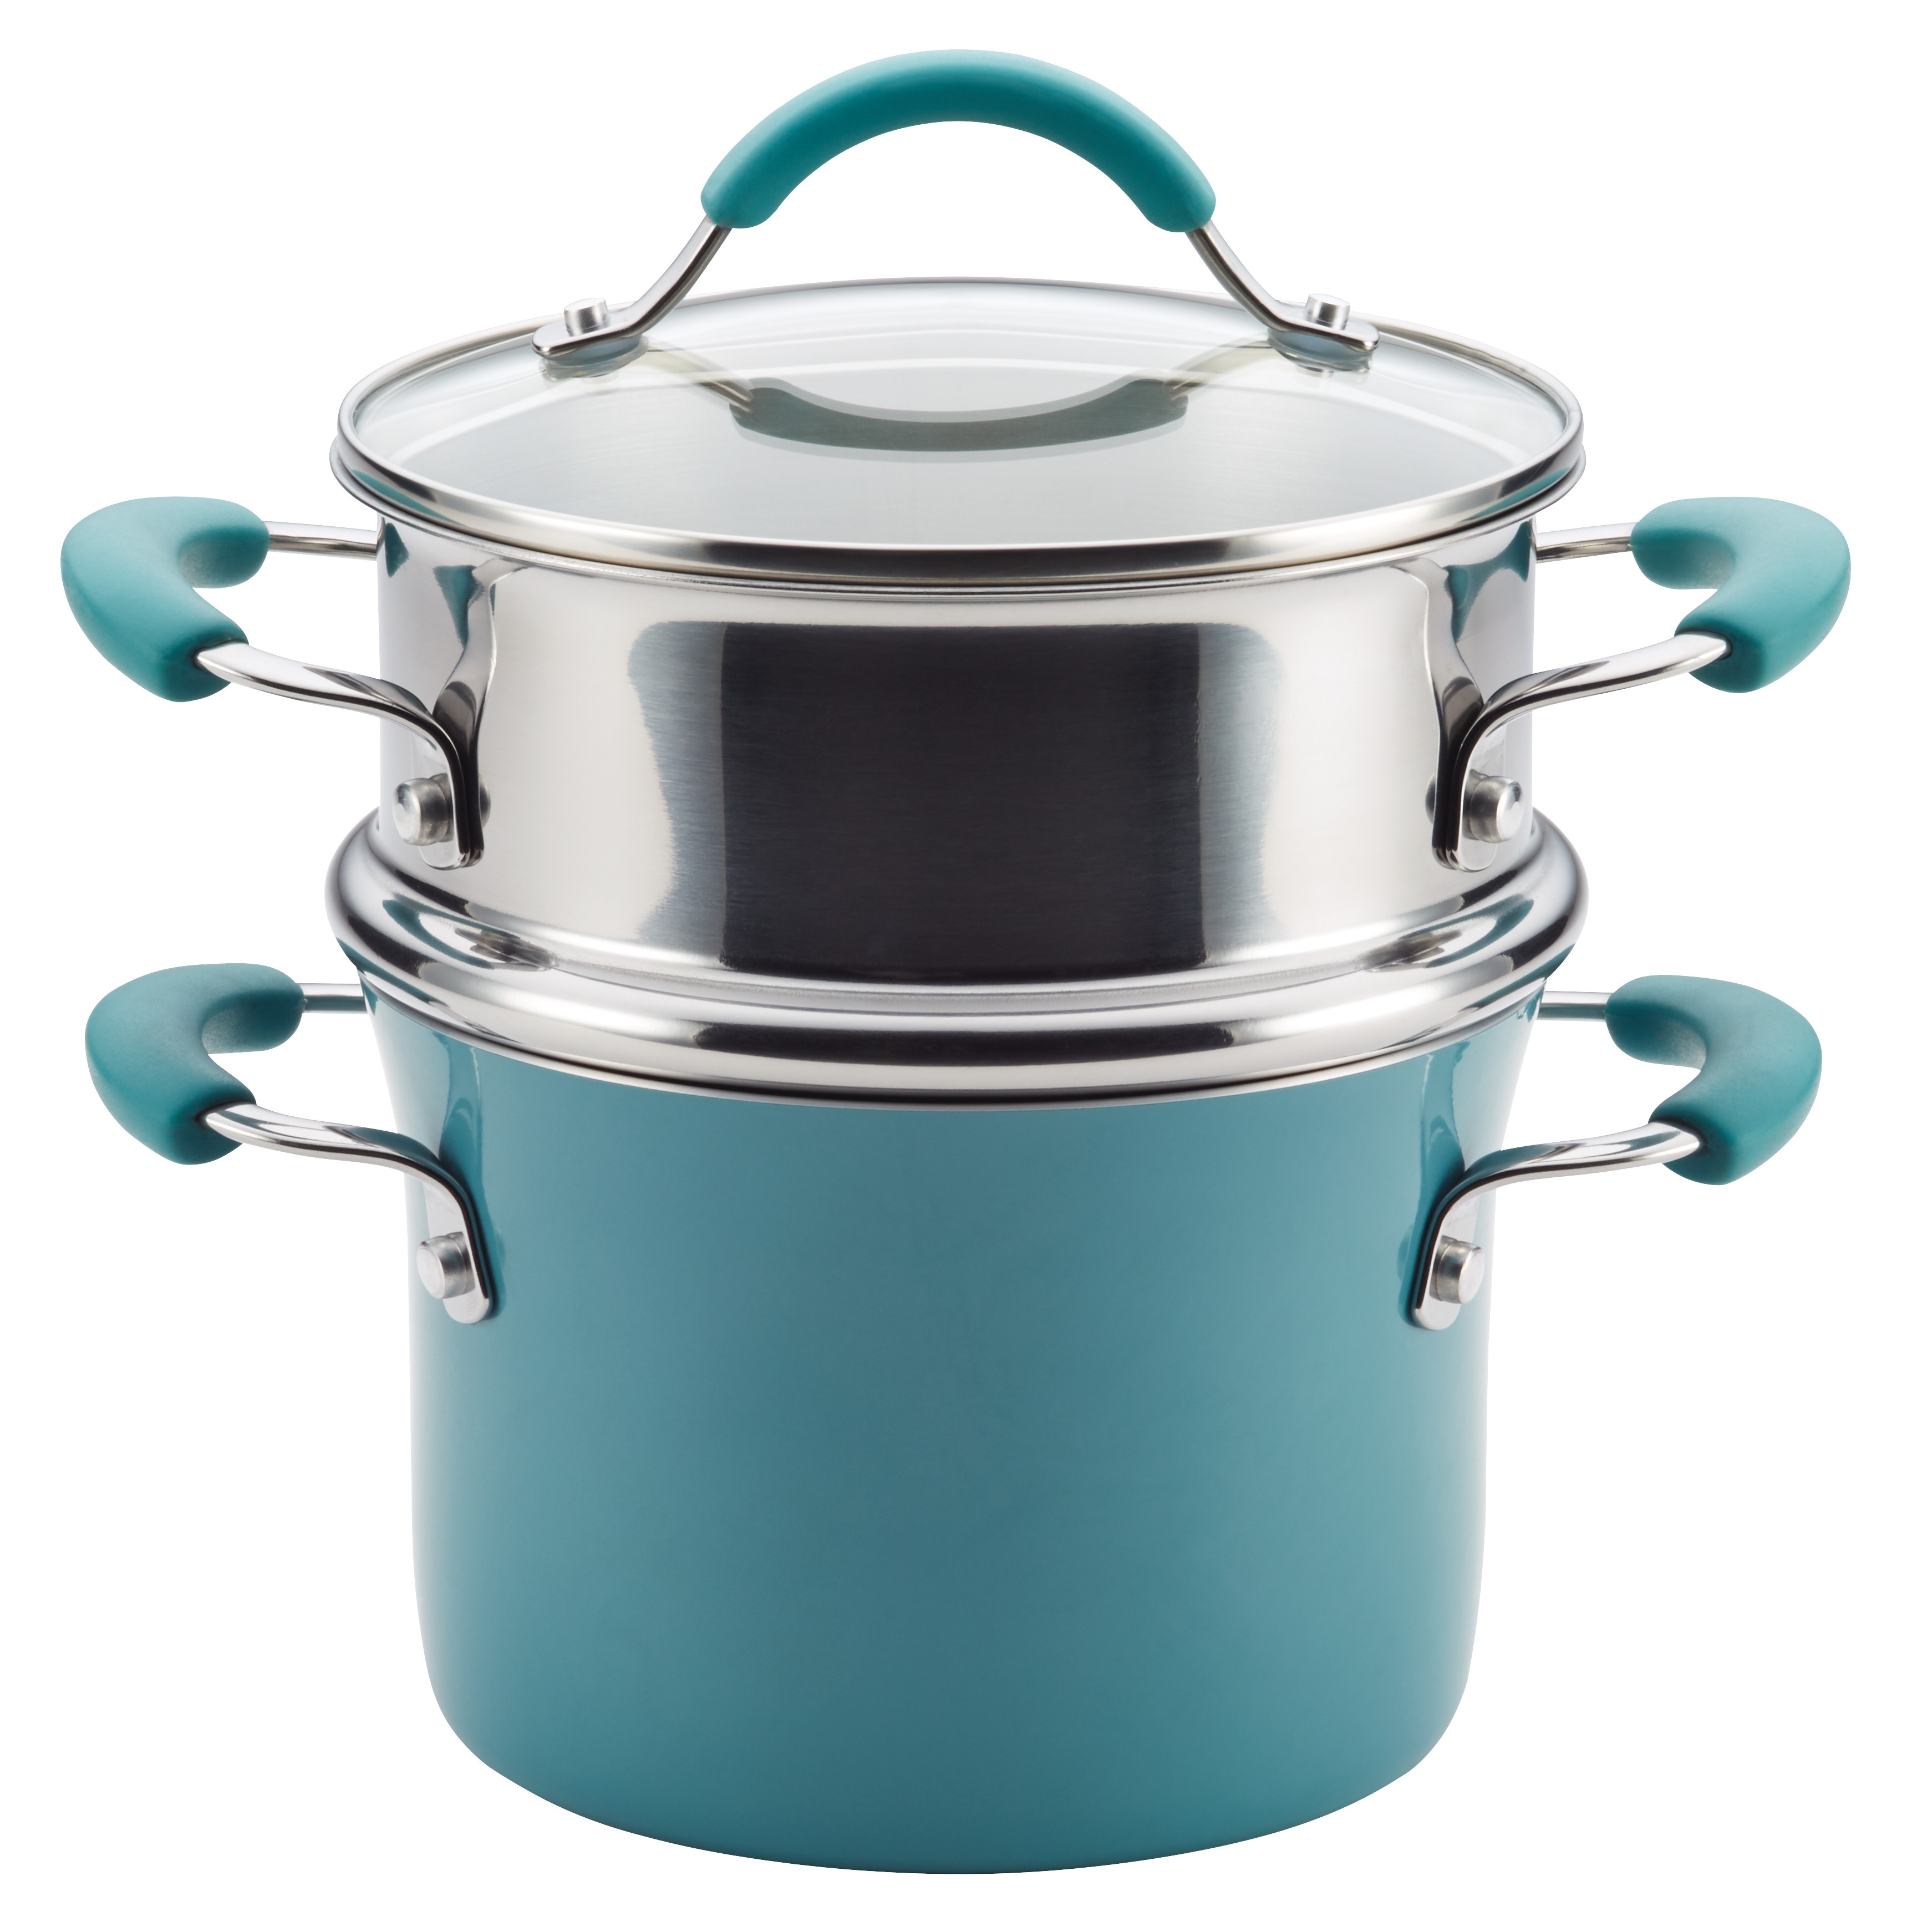 https://ak1.ostkcdn.com/images/products/is/images/direct/02ee197711cab8c7cba318588d67cb21bf6ef347/Rachael-Ray-Cucina-Hard-Enamel-Nonstick-Sauce-Pot-and-Steamer-Insert-Set%2C-3-Quart.jpg